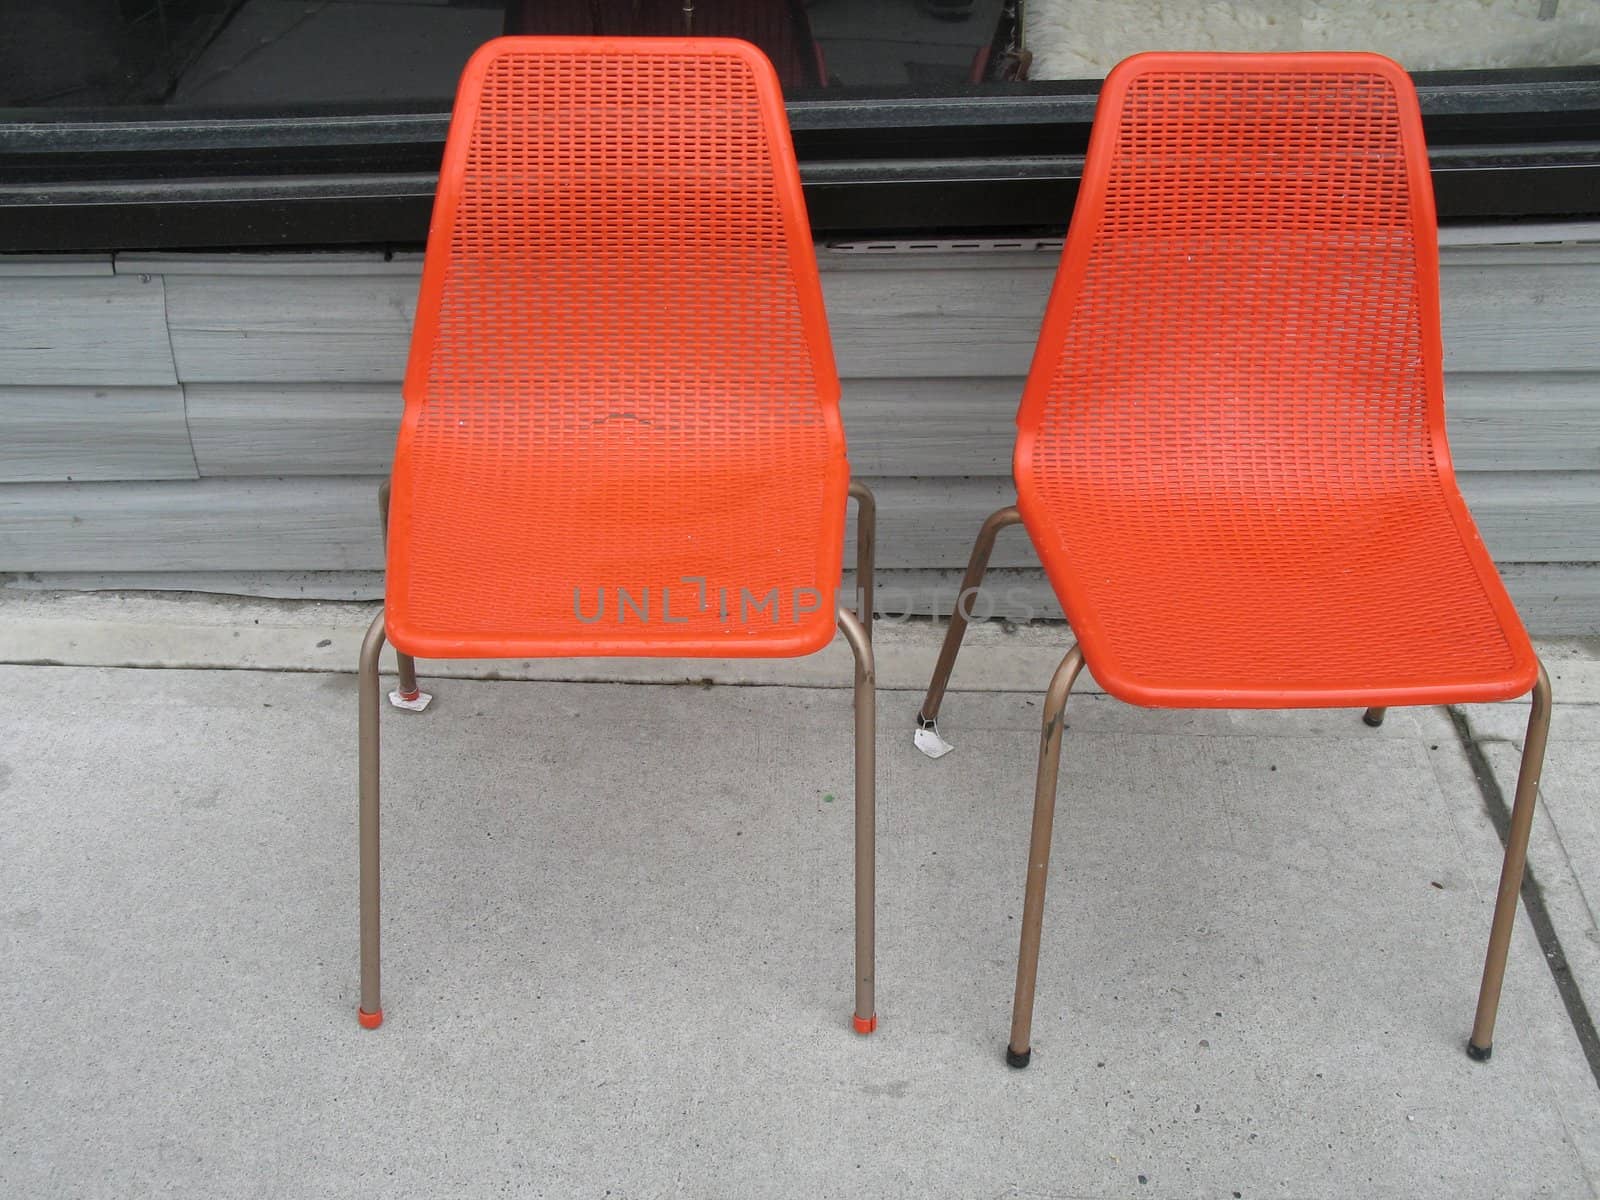 two old orange chairs